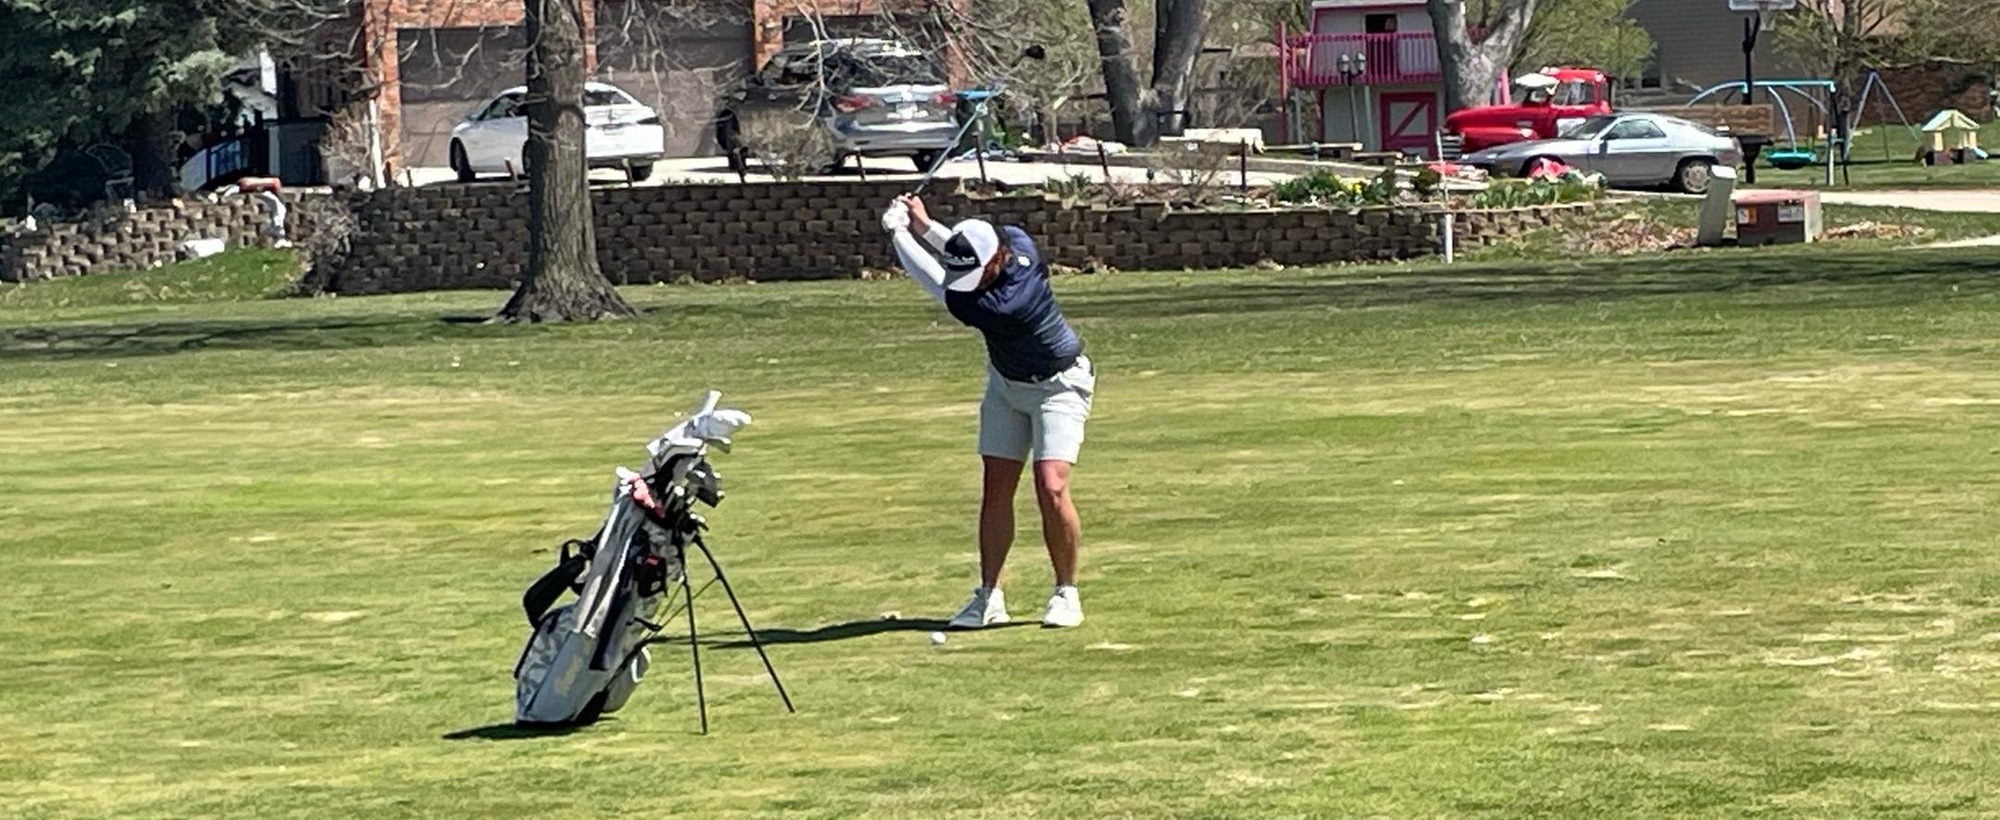 Laker Men Battle Wind at Fort Dodge Country Club